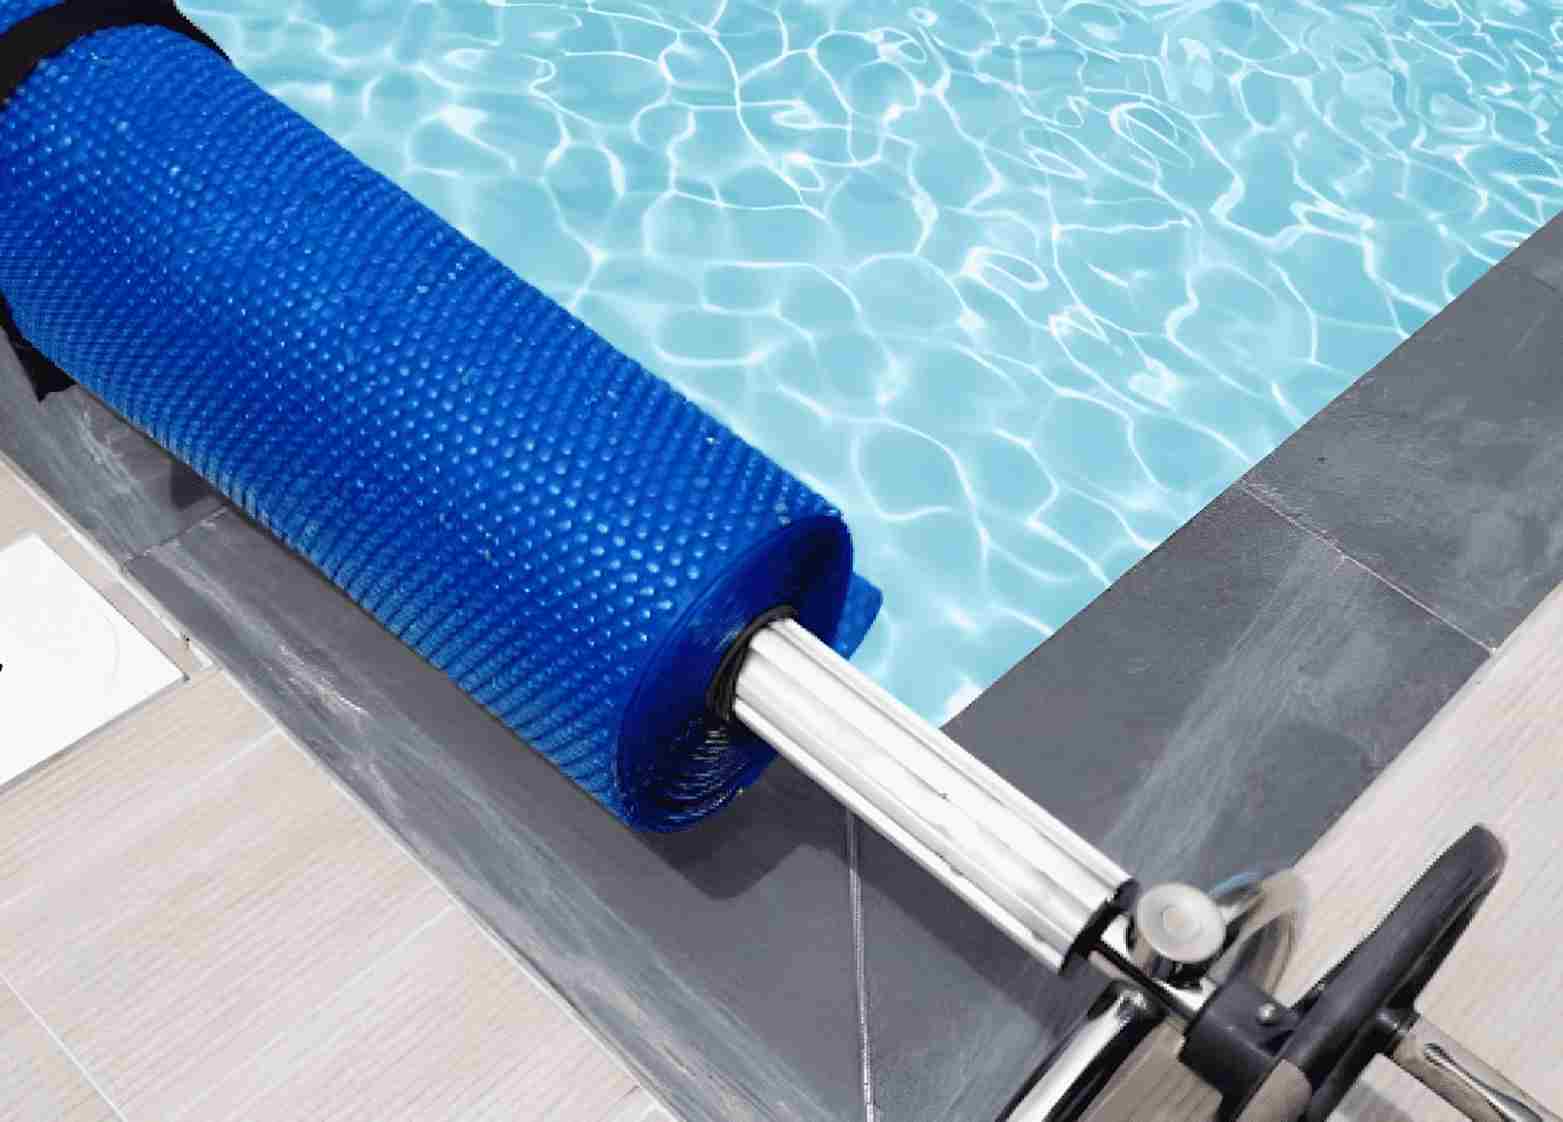 How To Use A Solar Pool Cover?